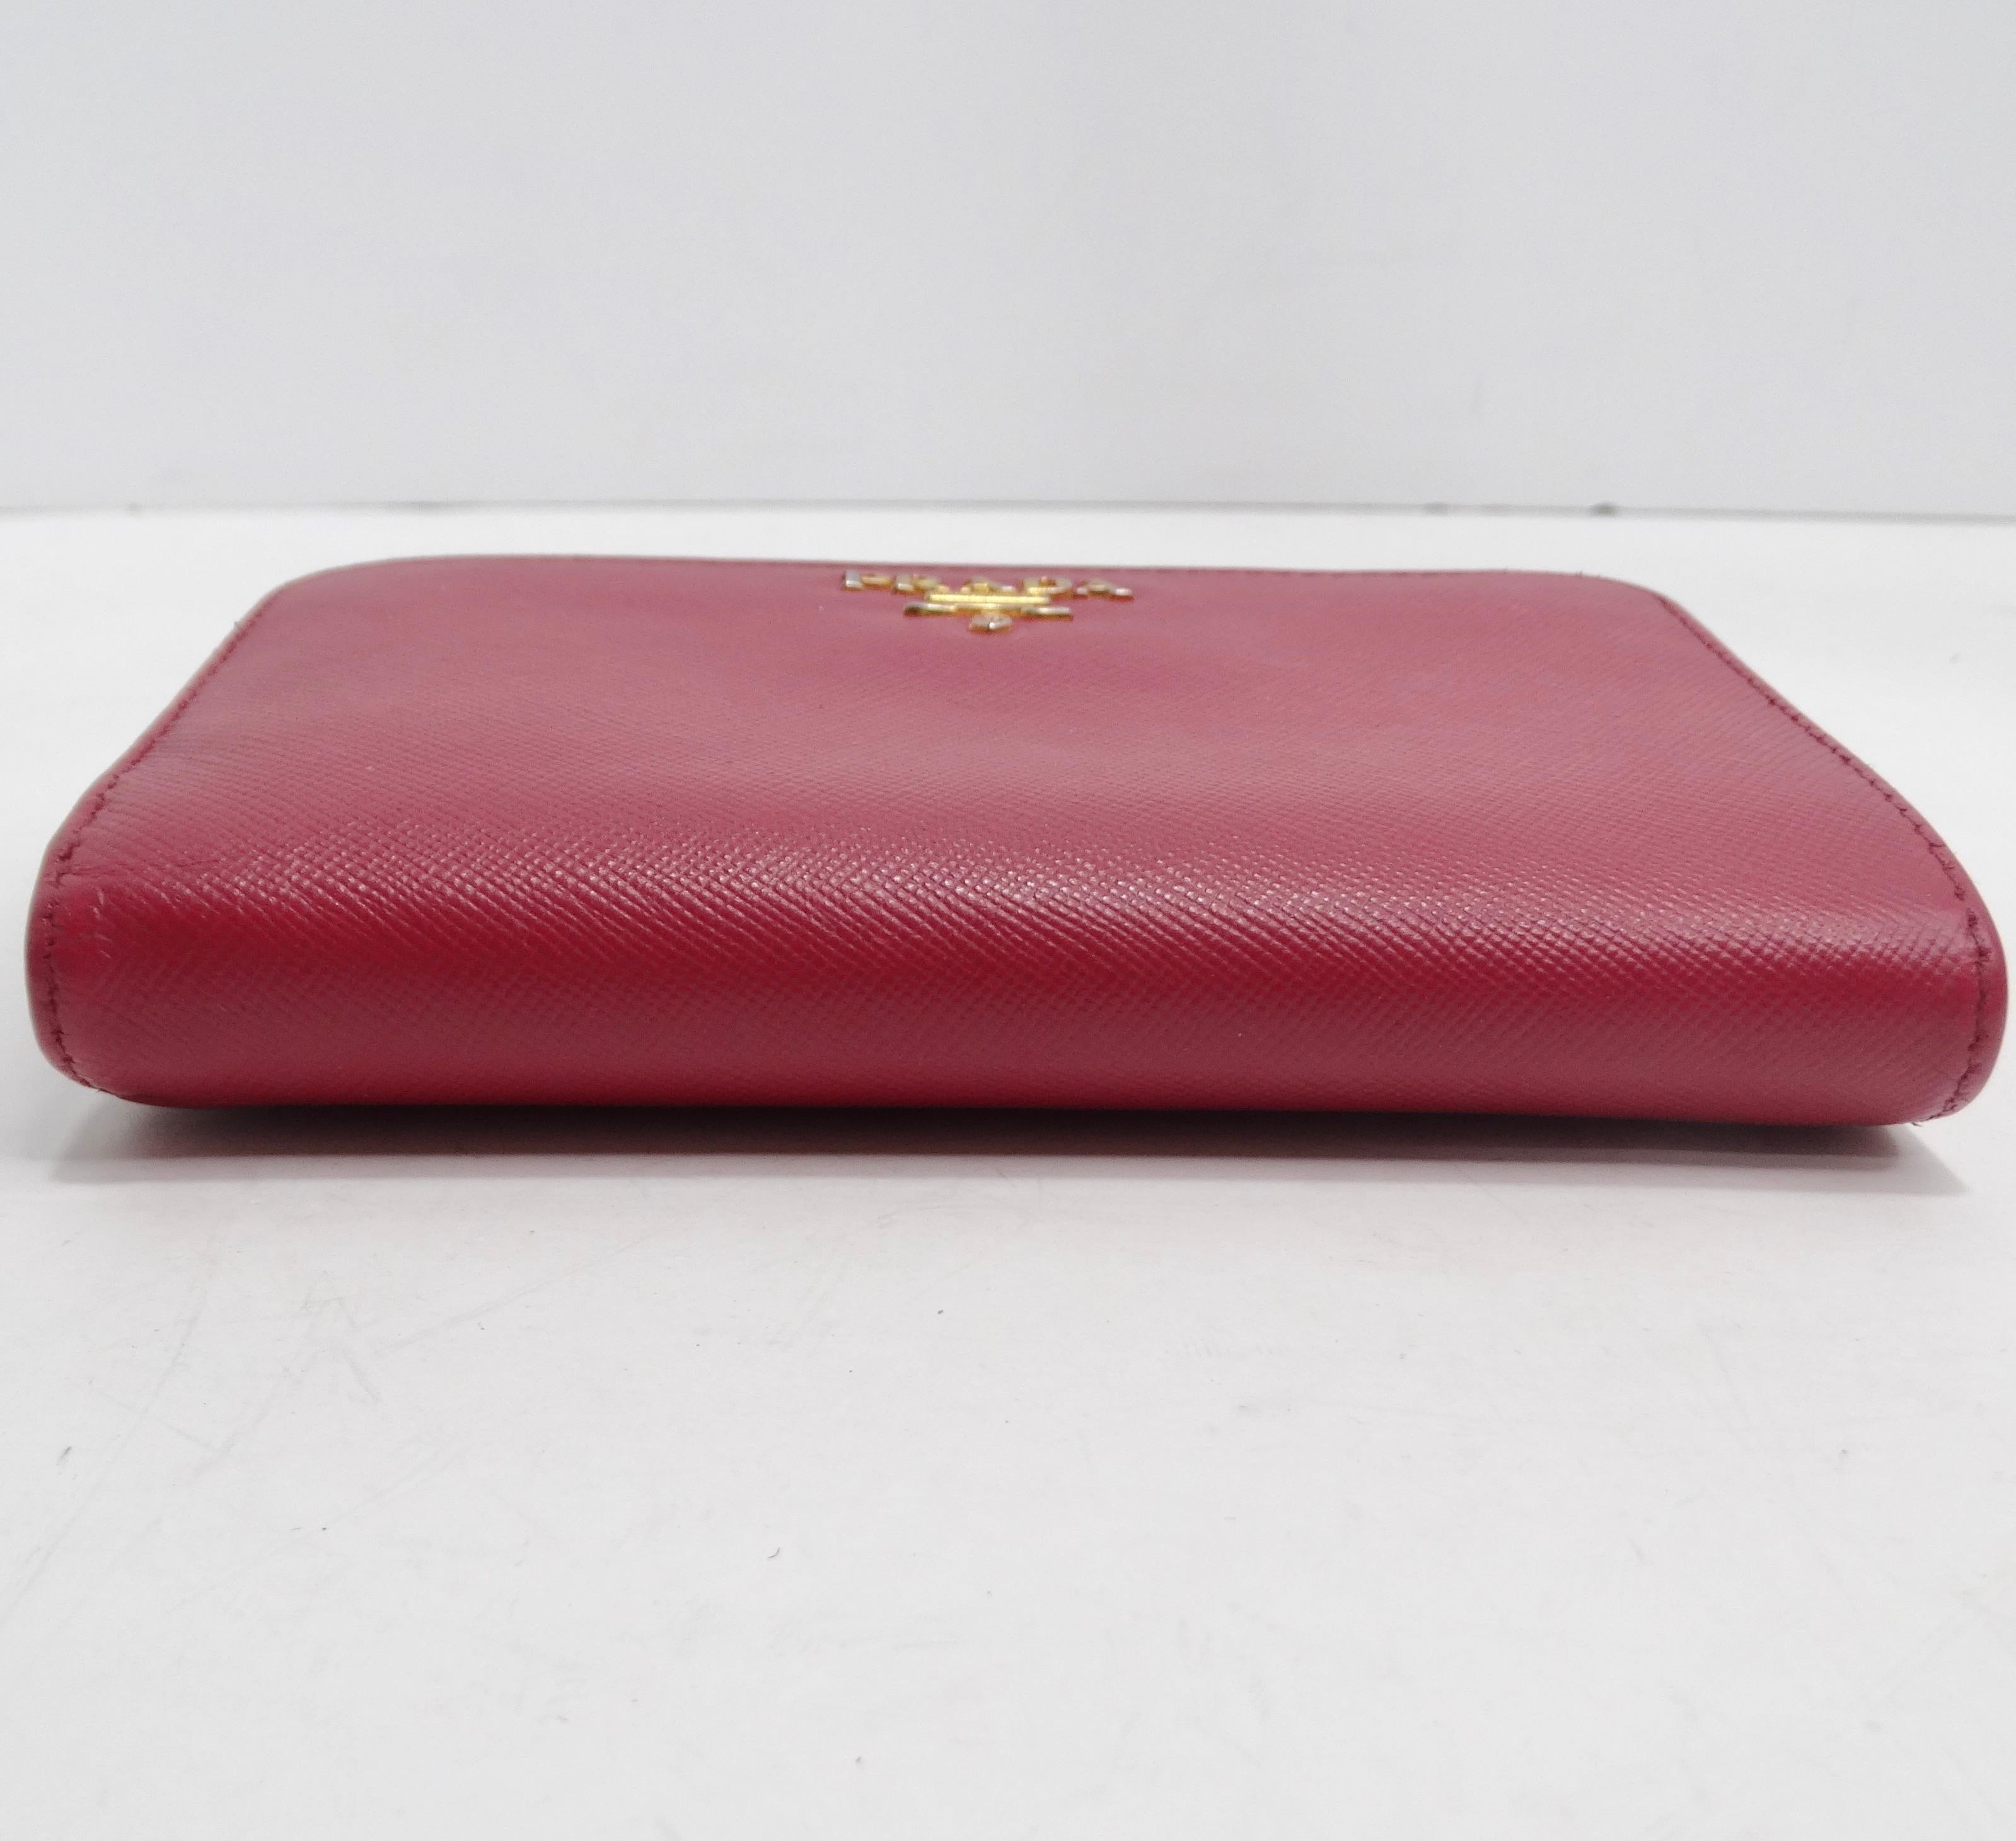 Prada Saffiano Leather Compact Wallet Pink In Excellent Condition For Sale In Scottsdale, AZ